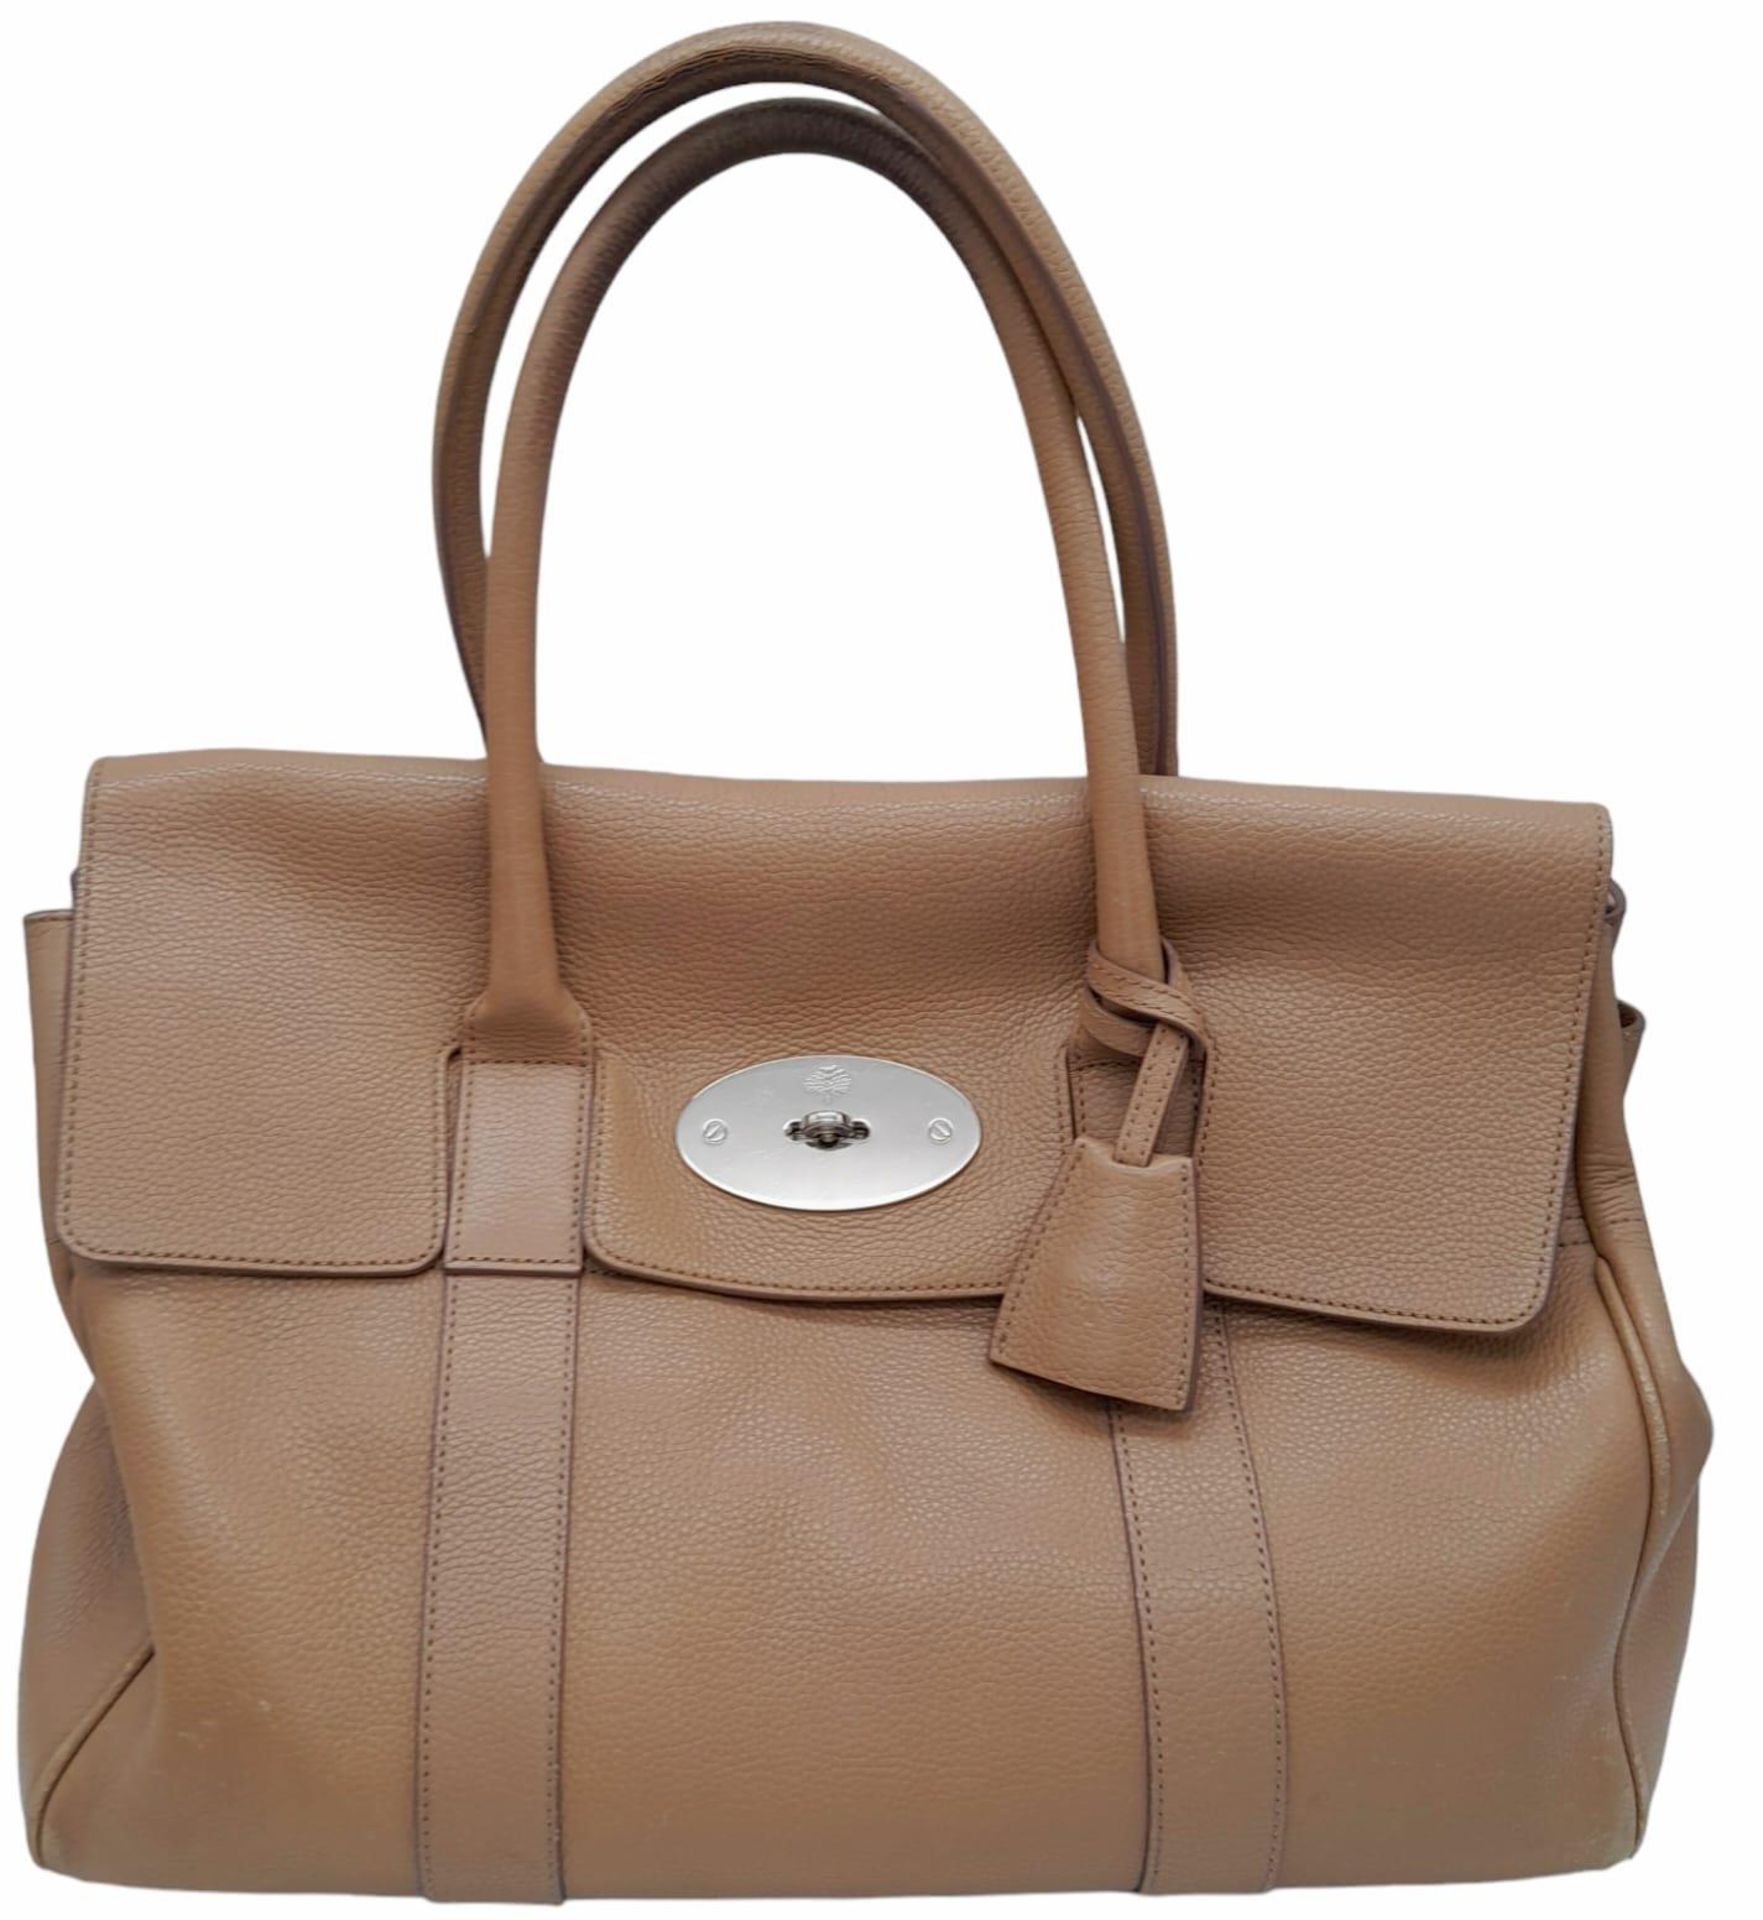 A Mulberry Light Brown Grained Leather Bayswater Satchel Bag. Silver Tone Hardware, A Turn Lock on